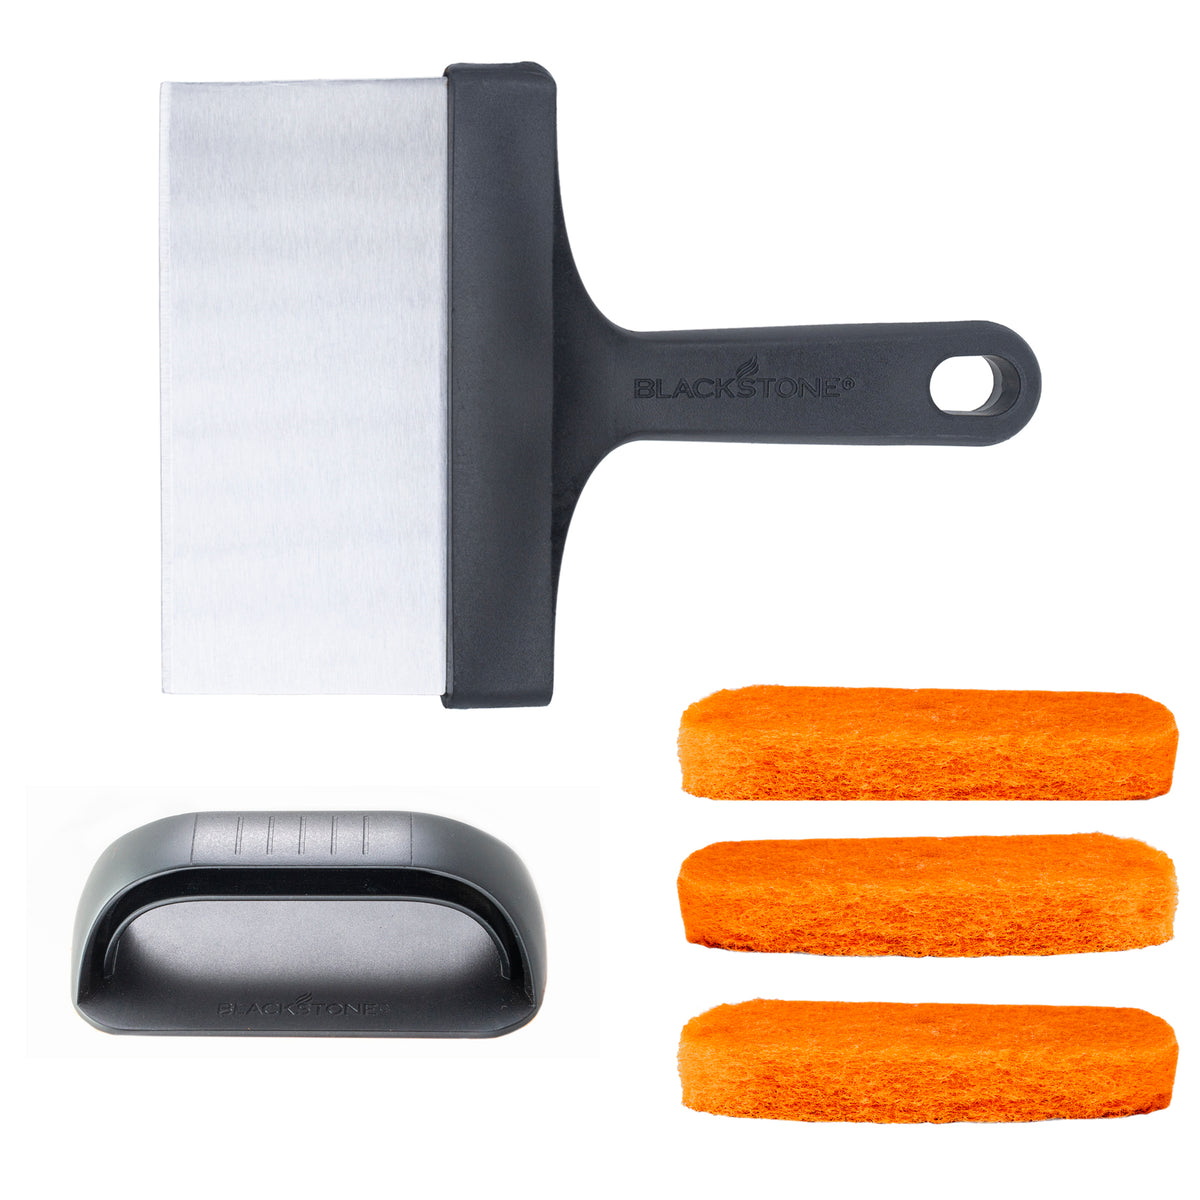 Blackstone 5059 Griddle Cleaning Kit